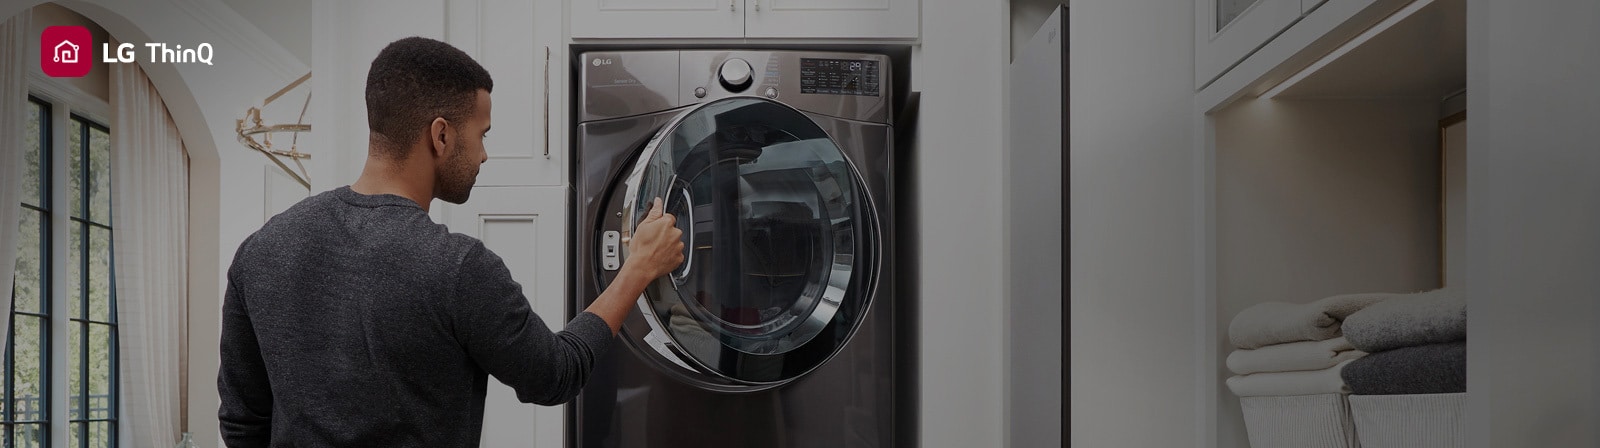 an image of a man opens LG dryer